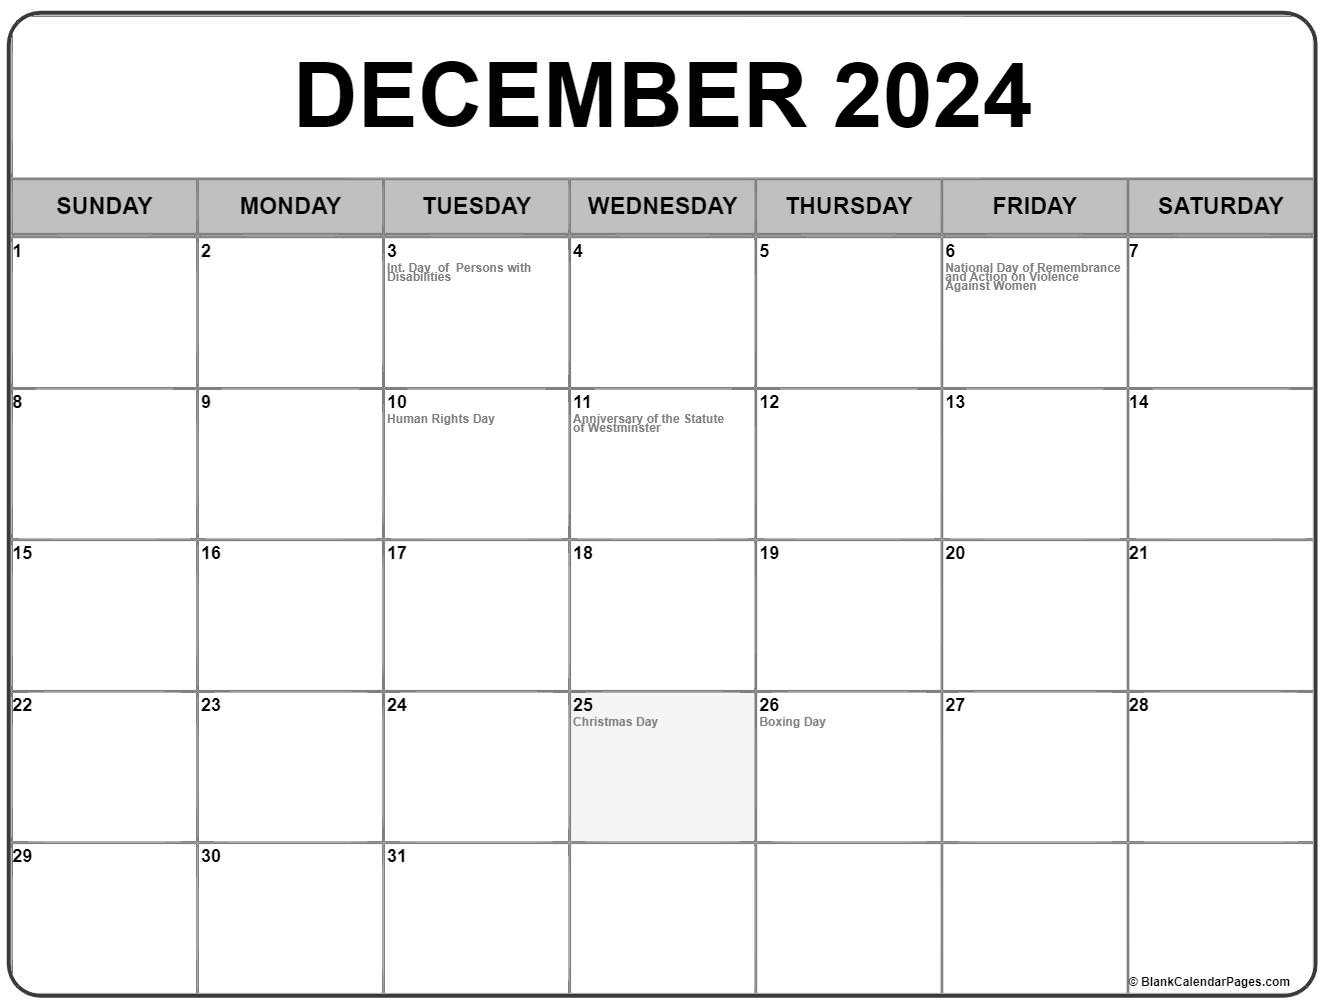 Collection Of December 2020 Calendars With Holidays